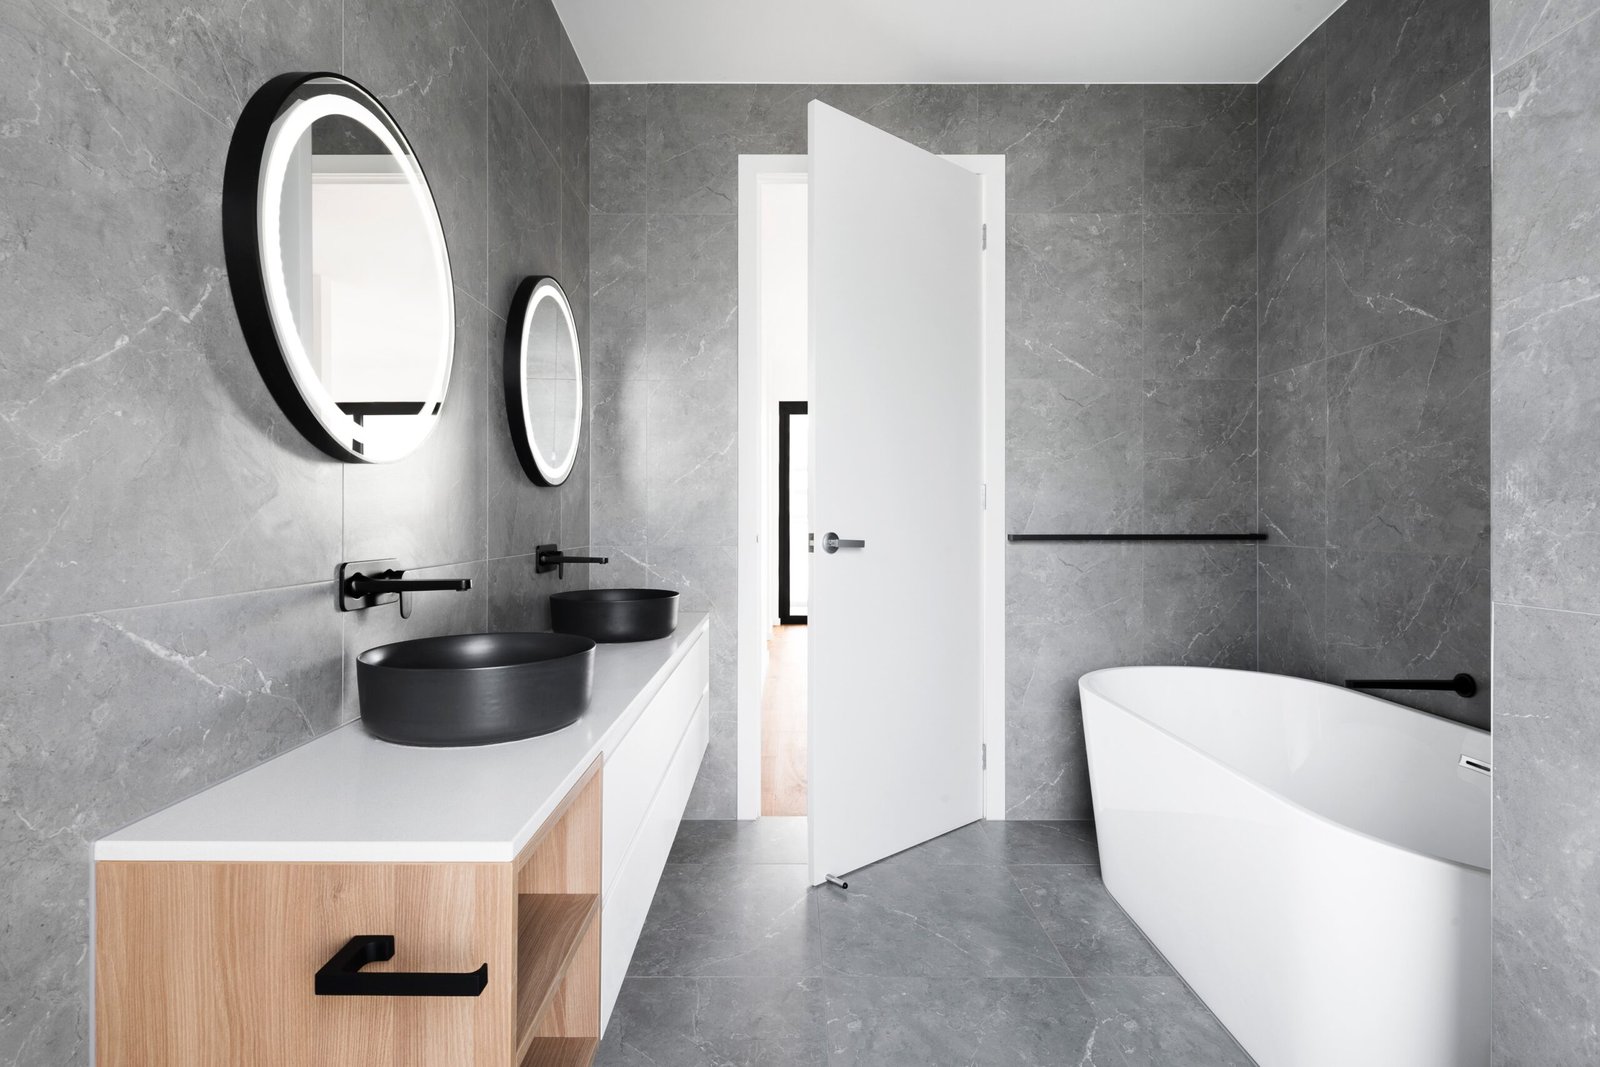 image showing a grey tiled bathroom with white and black furniture